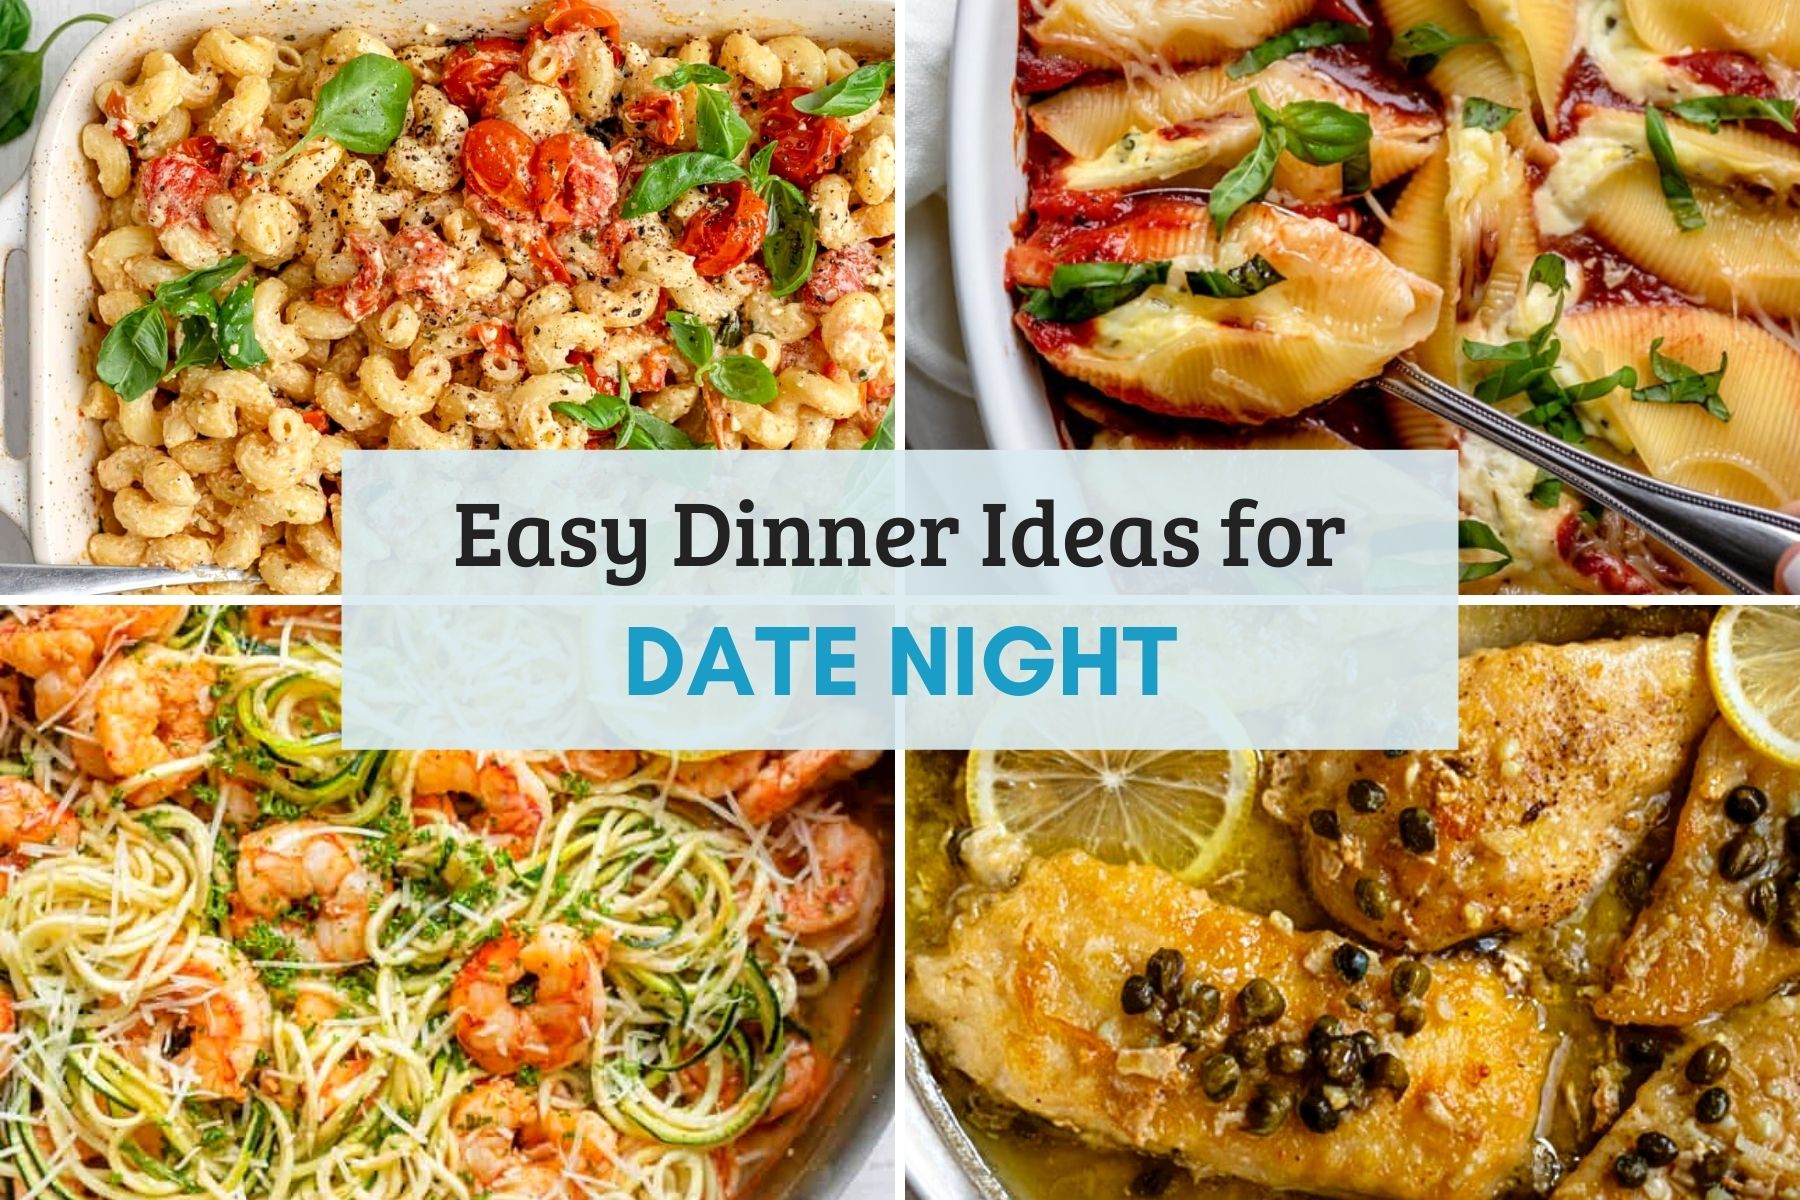 Date Night Dinner Ideas Round Up Collage Sized for Landing Page